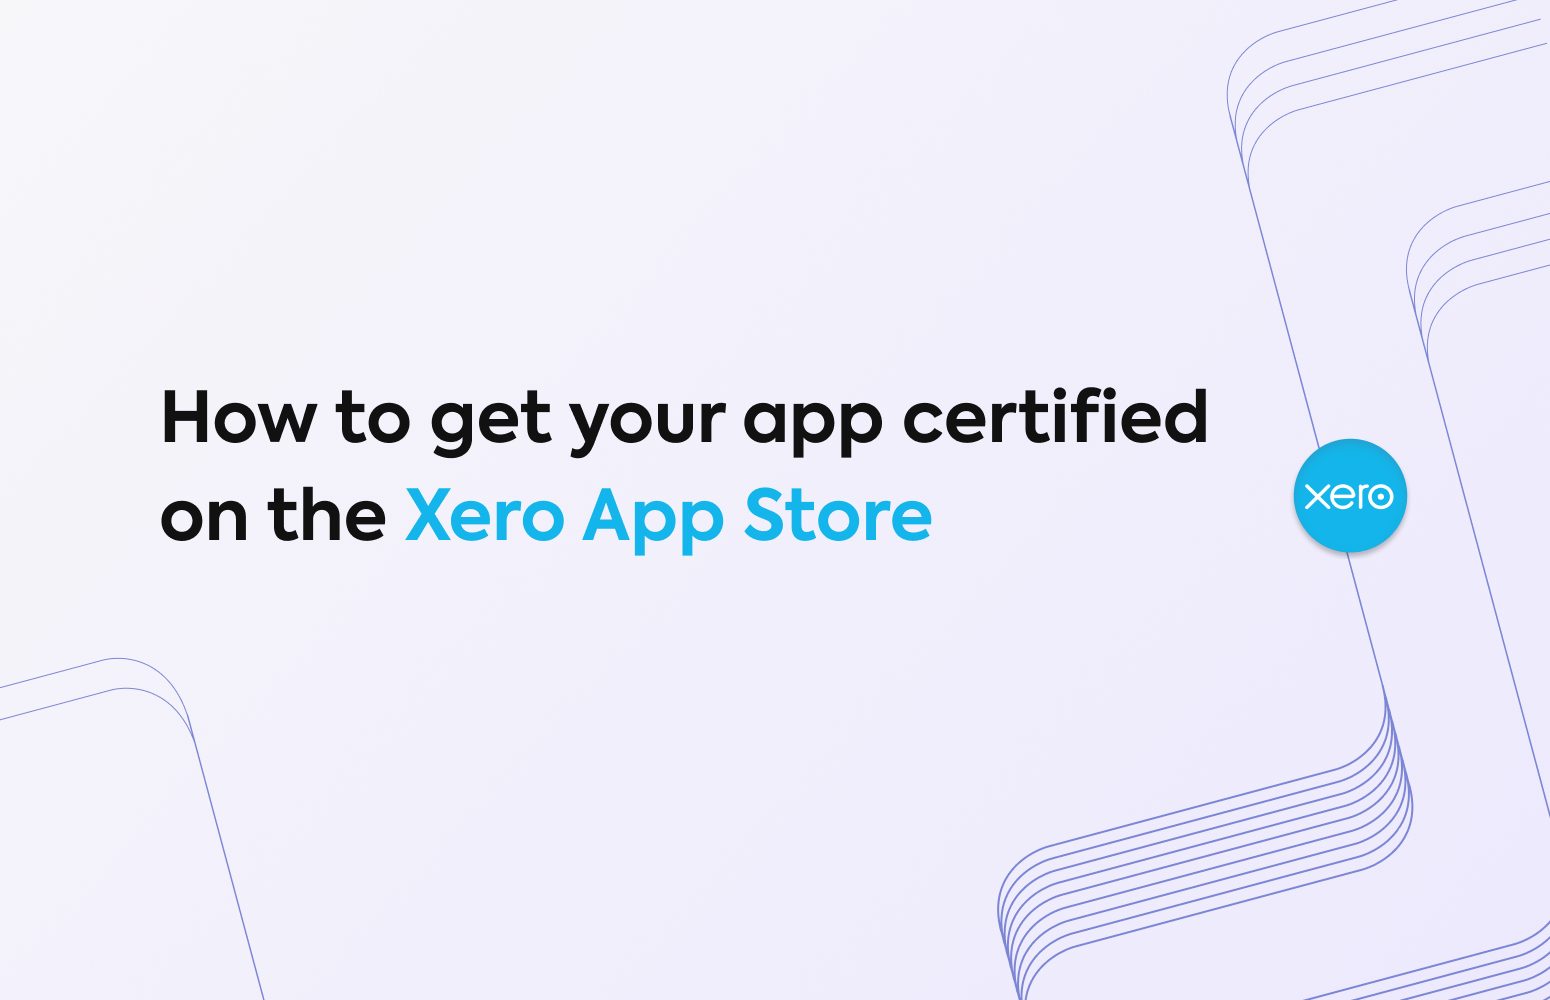 How to get your app certified on the Xero App Store